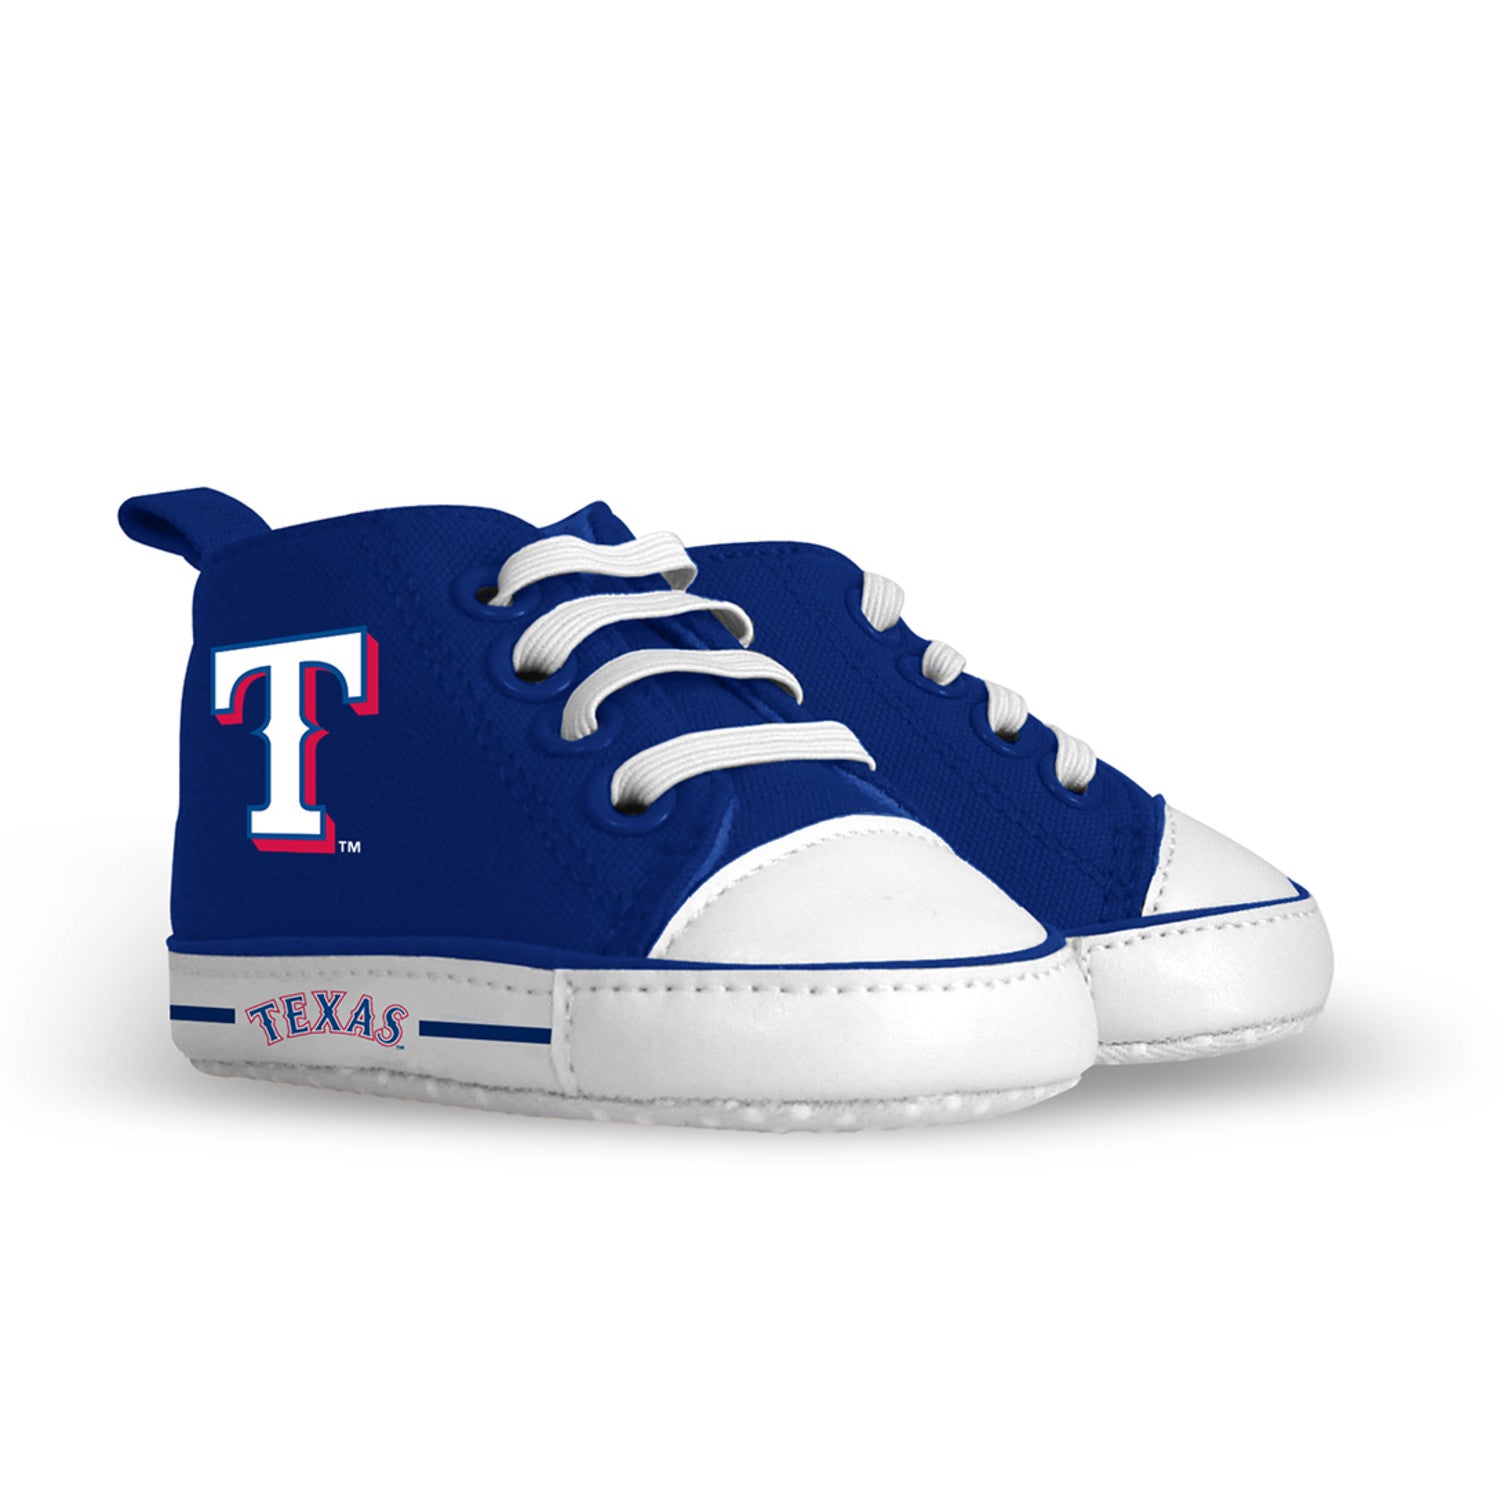 Texas Rangers Baby Shoes